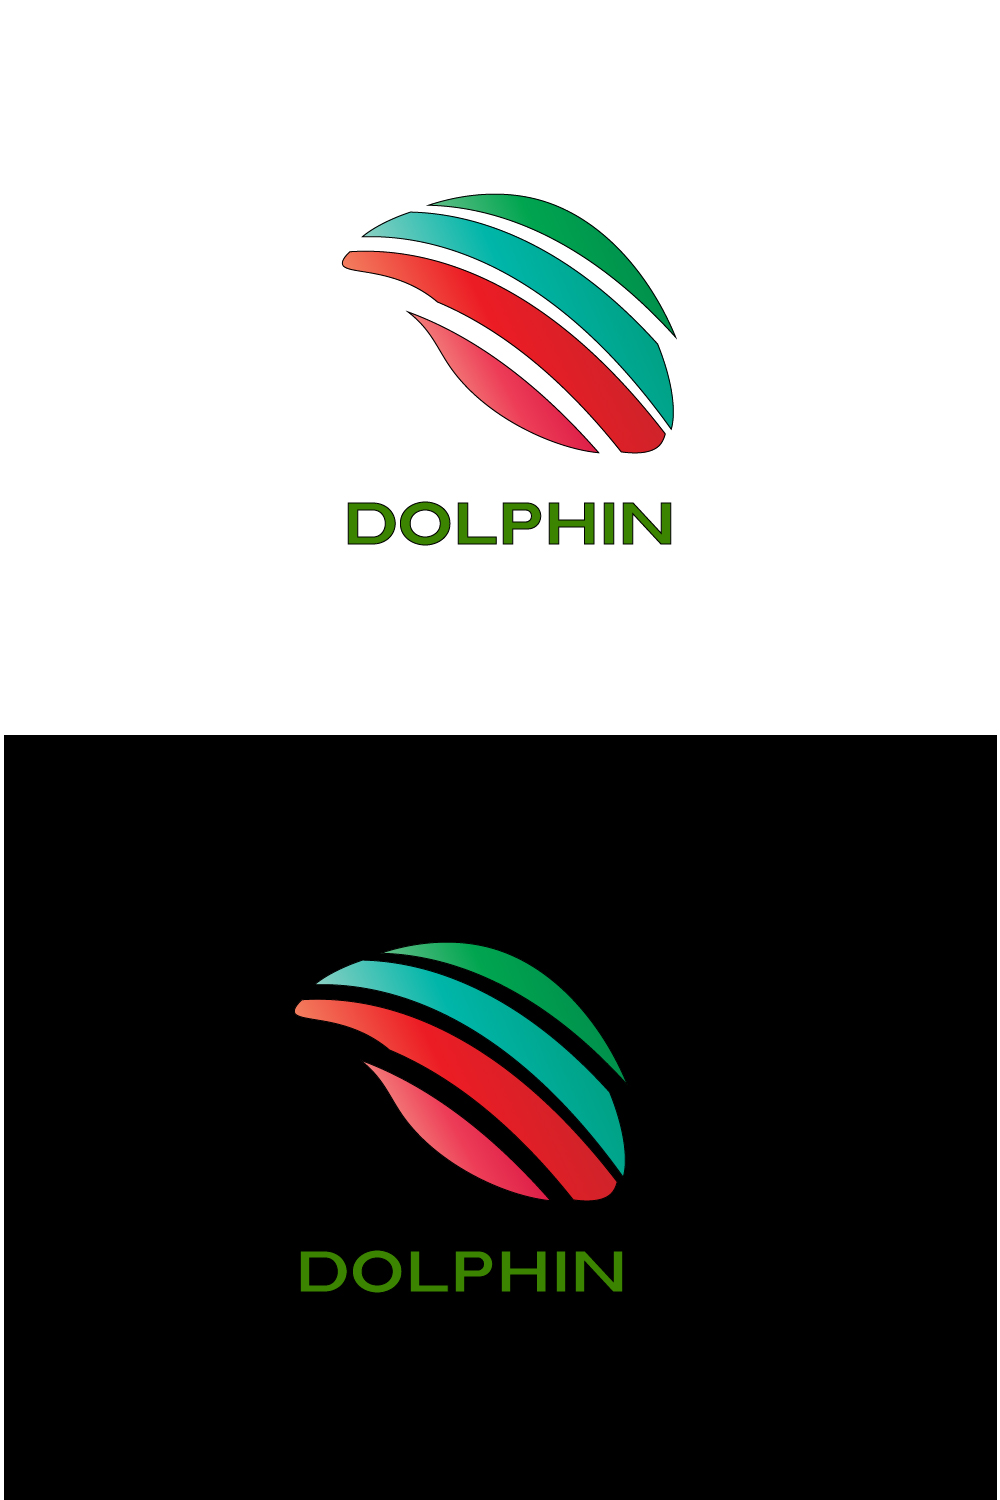 DOLPHIN pinterest preview image.